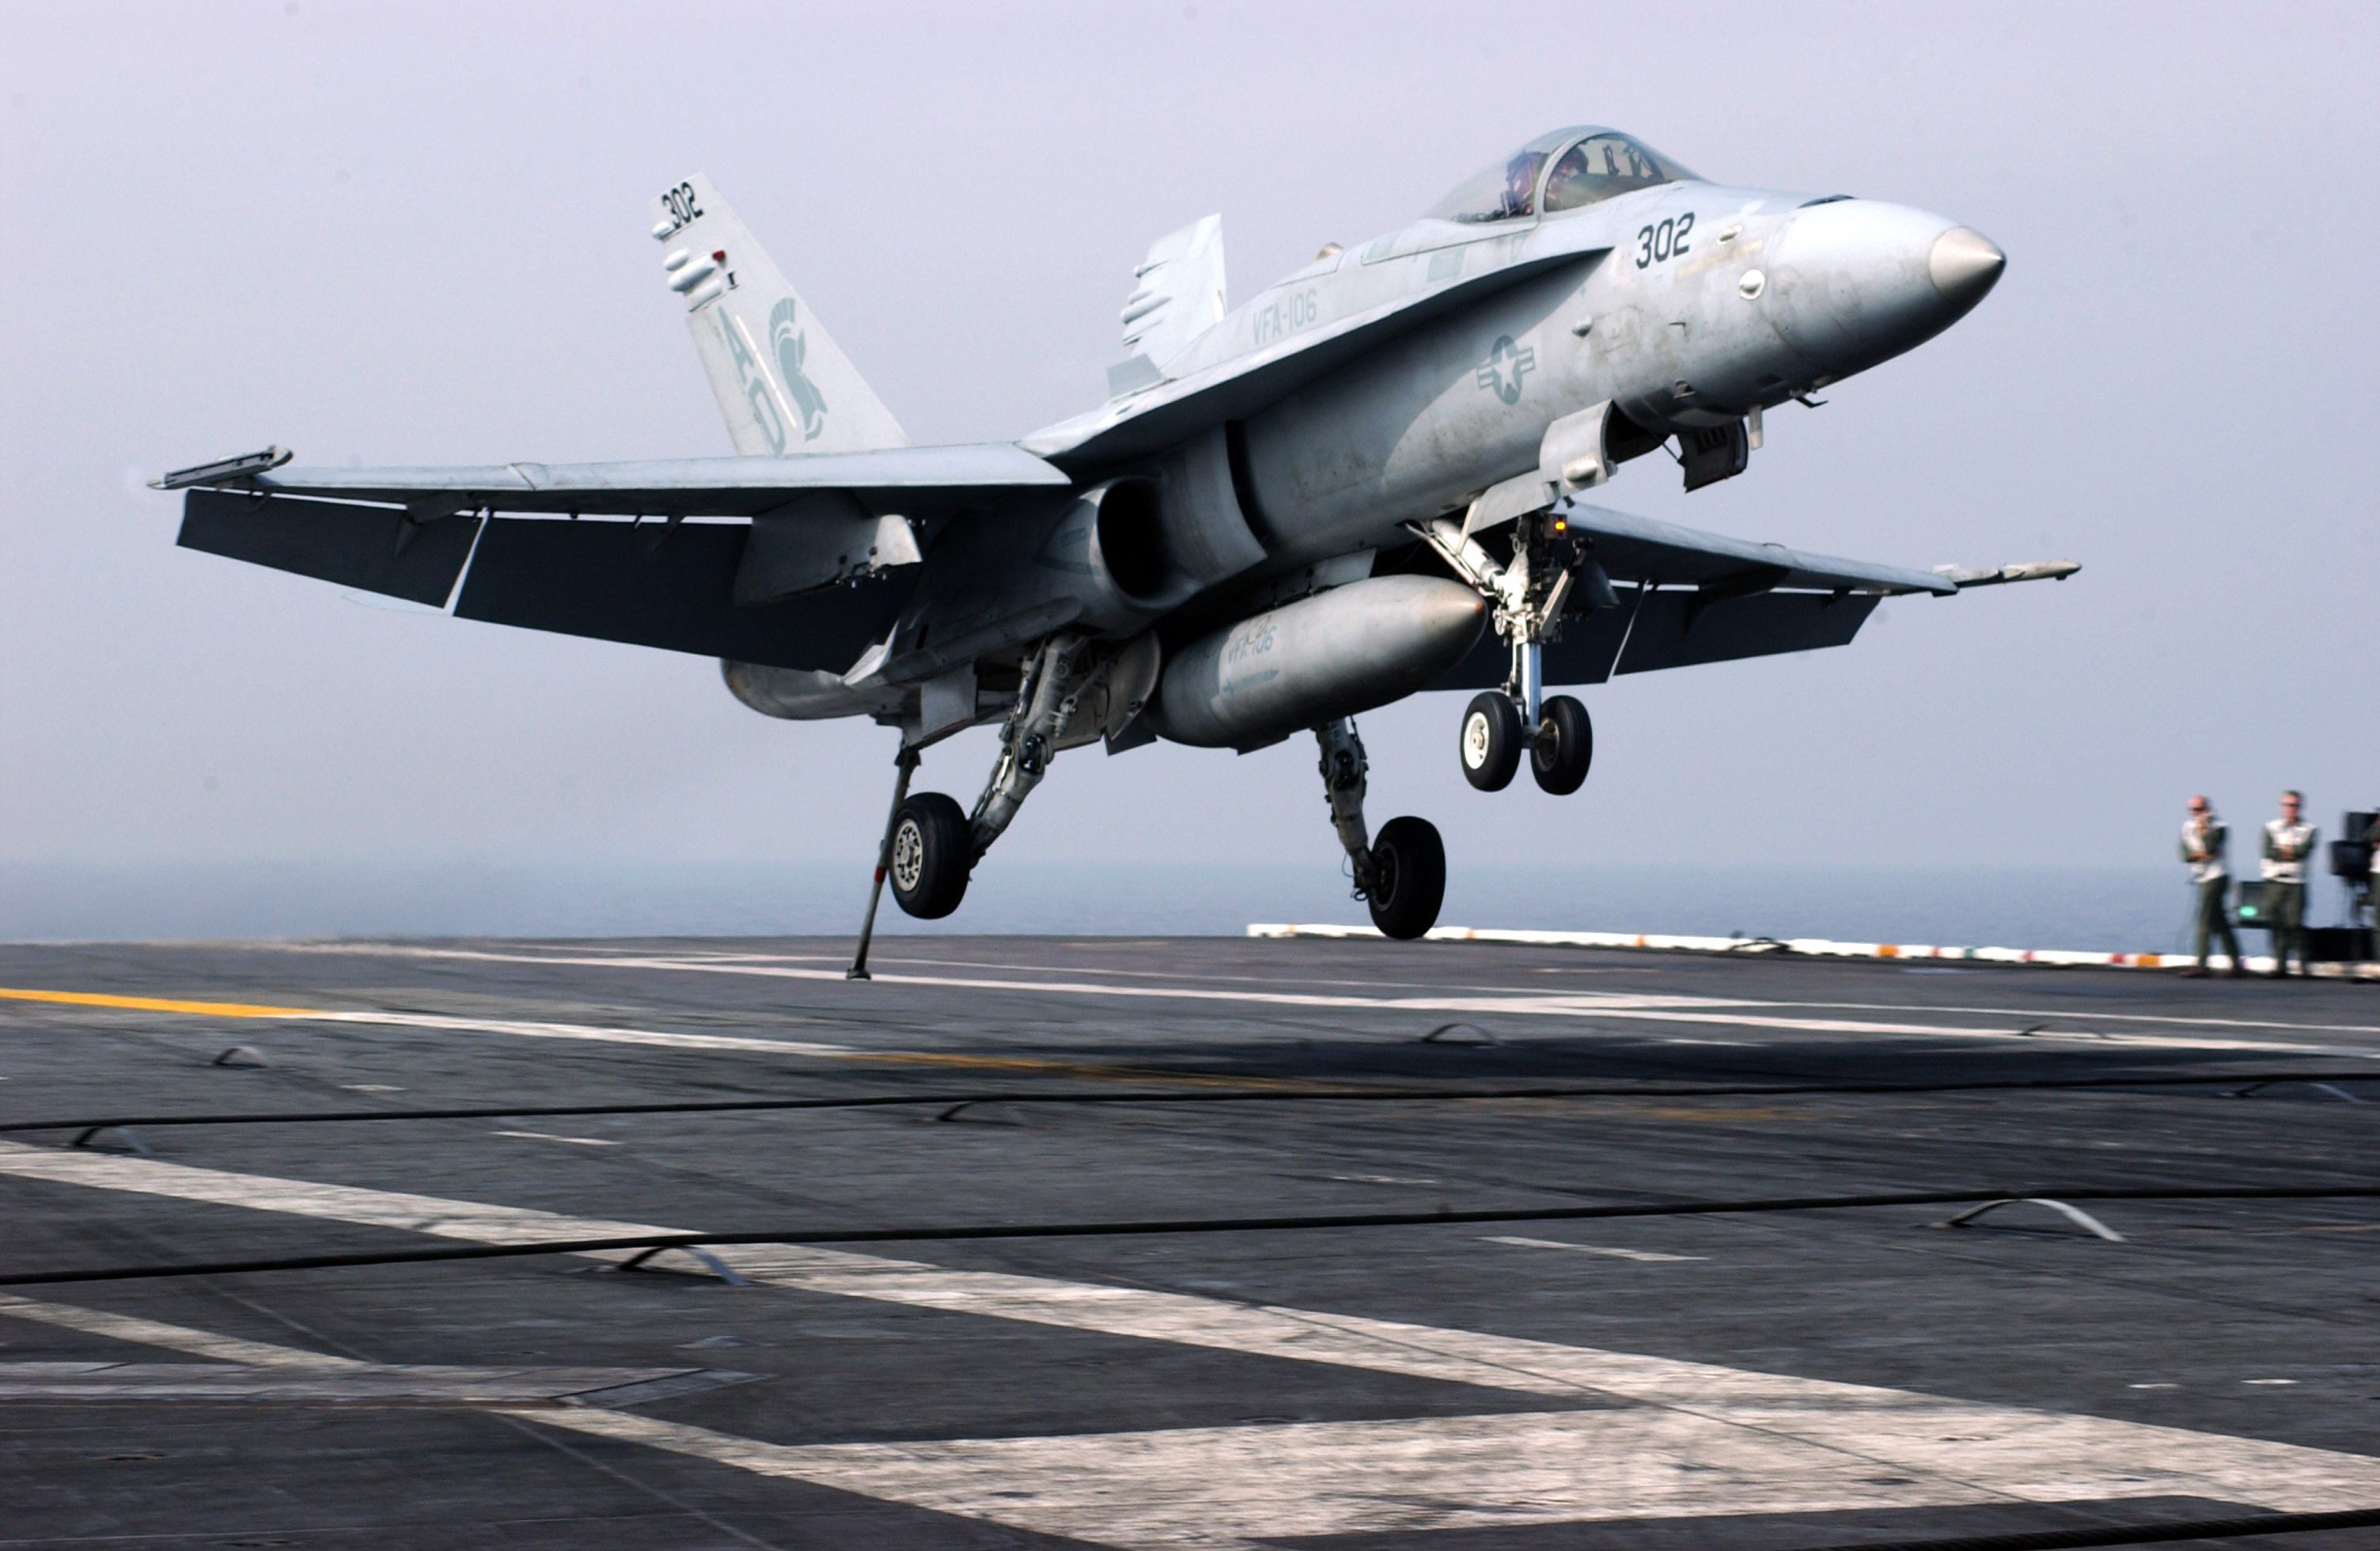 An F/A-18C Hornet assigned to the "Gladiators" of Strike Fighter Squadron 106 (VFA-106) makes an arrested landing aboard USS Theodore Roosevelt in 2006. US Navy Photo